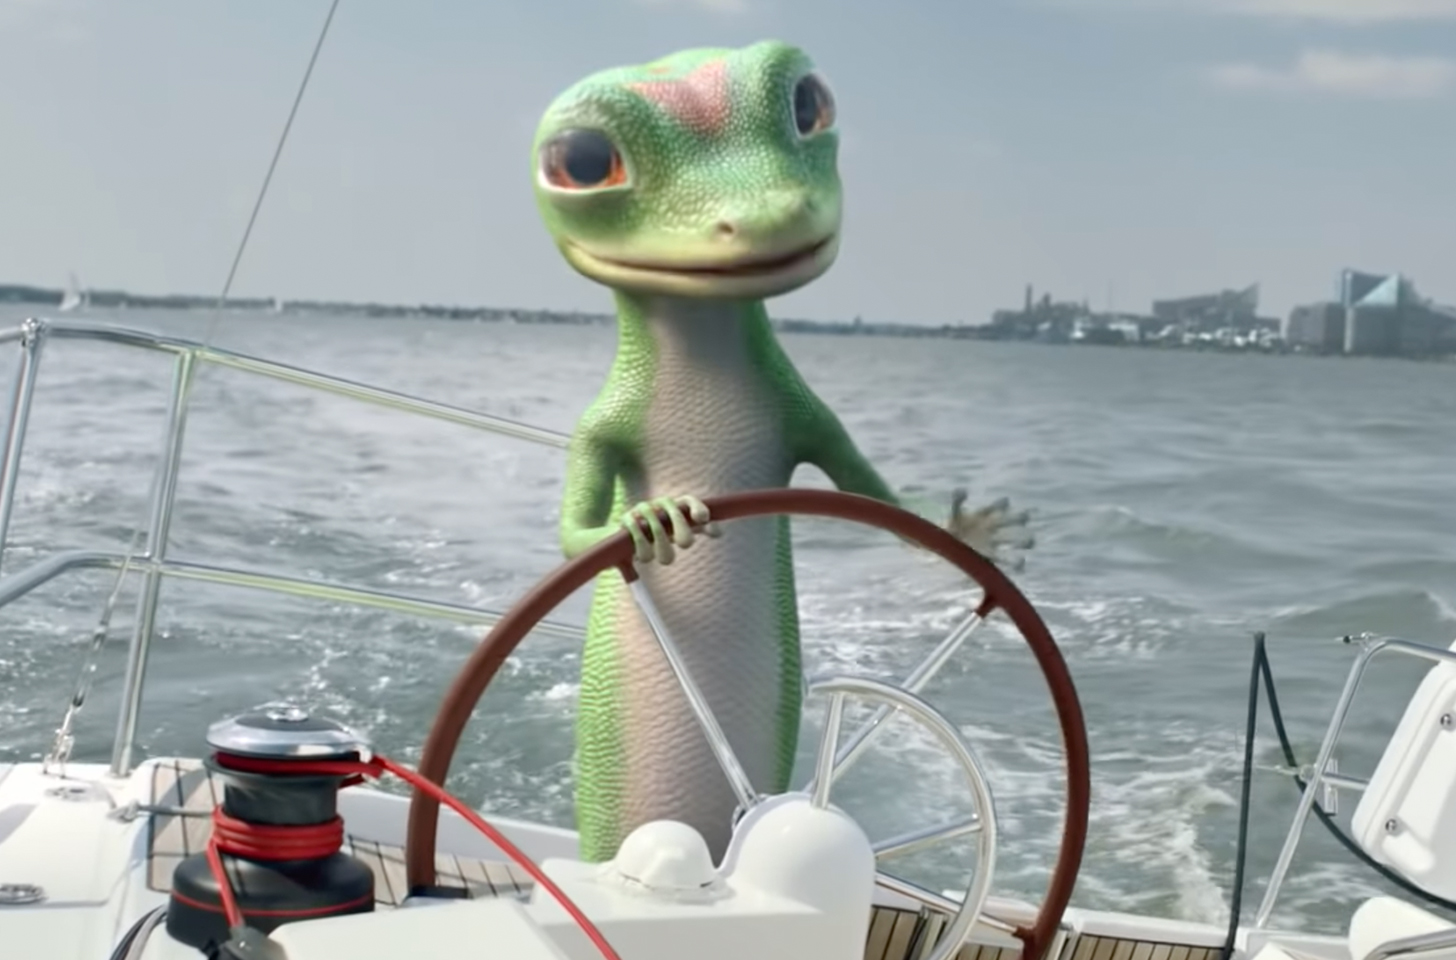 Who is The Voice Of The Geico Gecko?